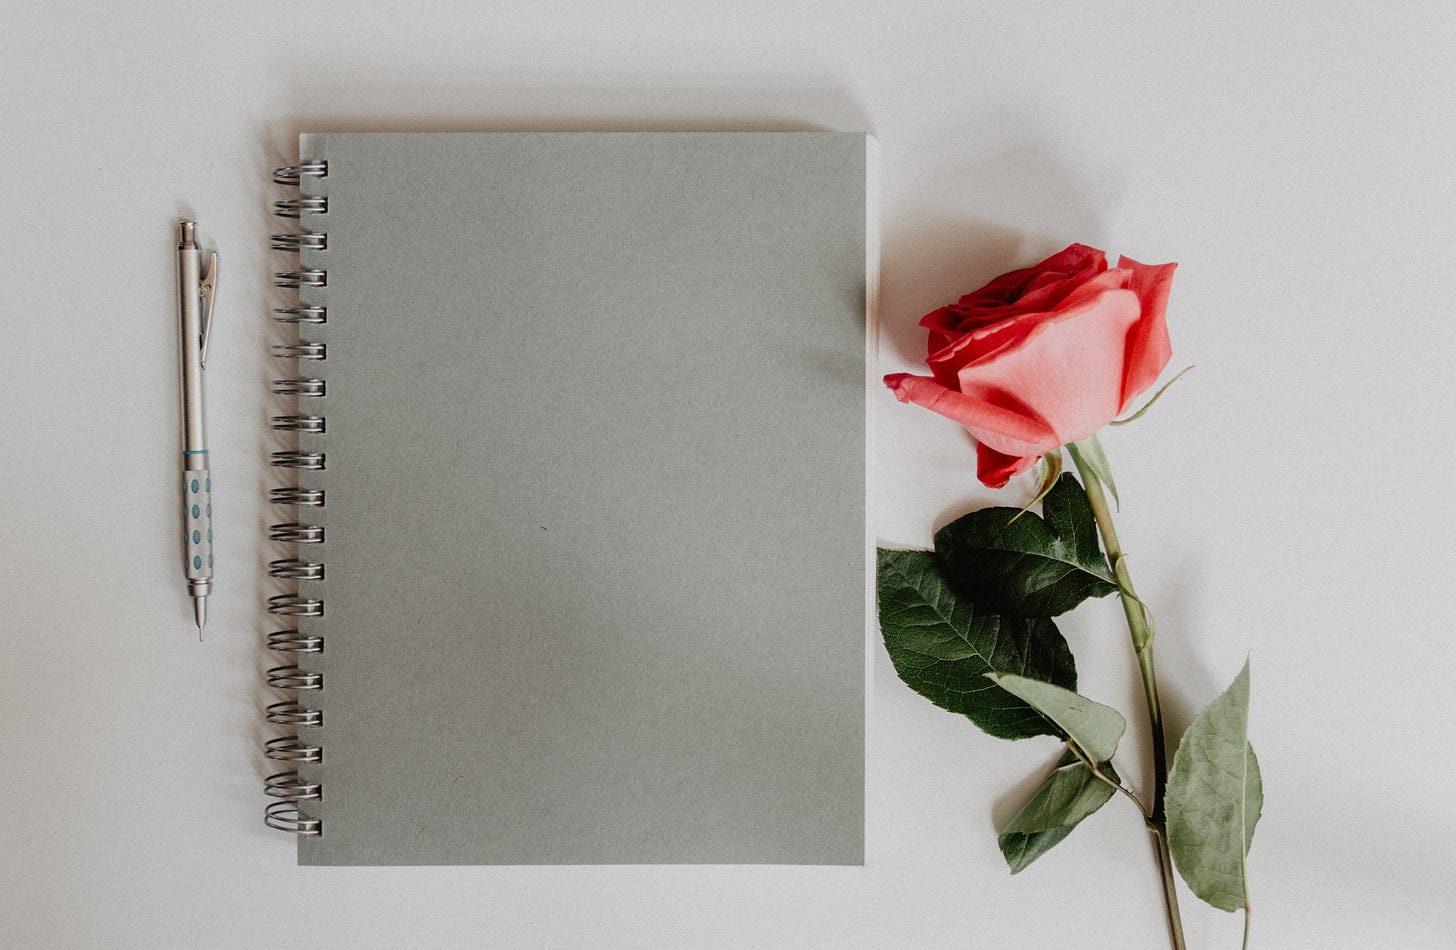 Notebook with rose by Kelly Sikkema on Unsplash.